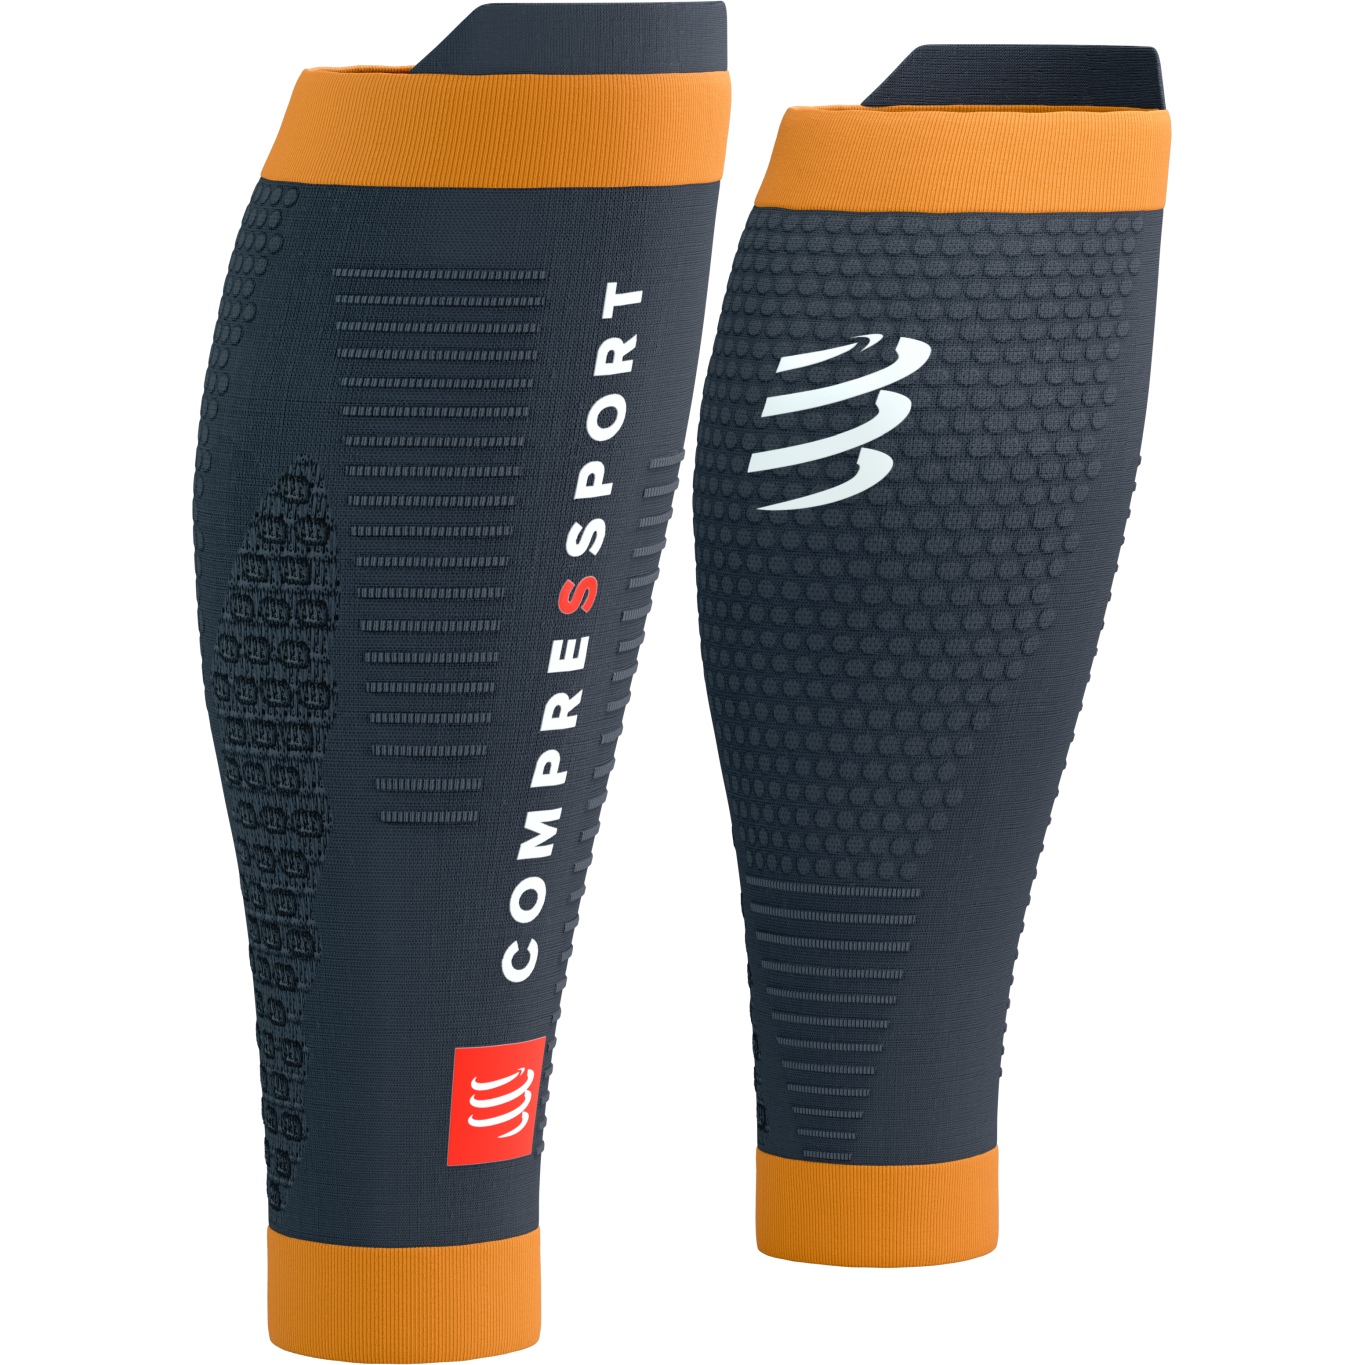 Picture of Compressport R2 3.0 Compression Calf Sleeves - magnet/autumn glory